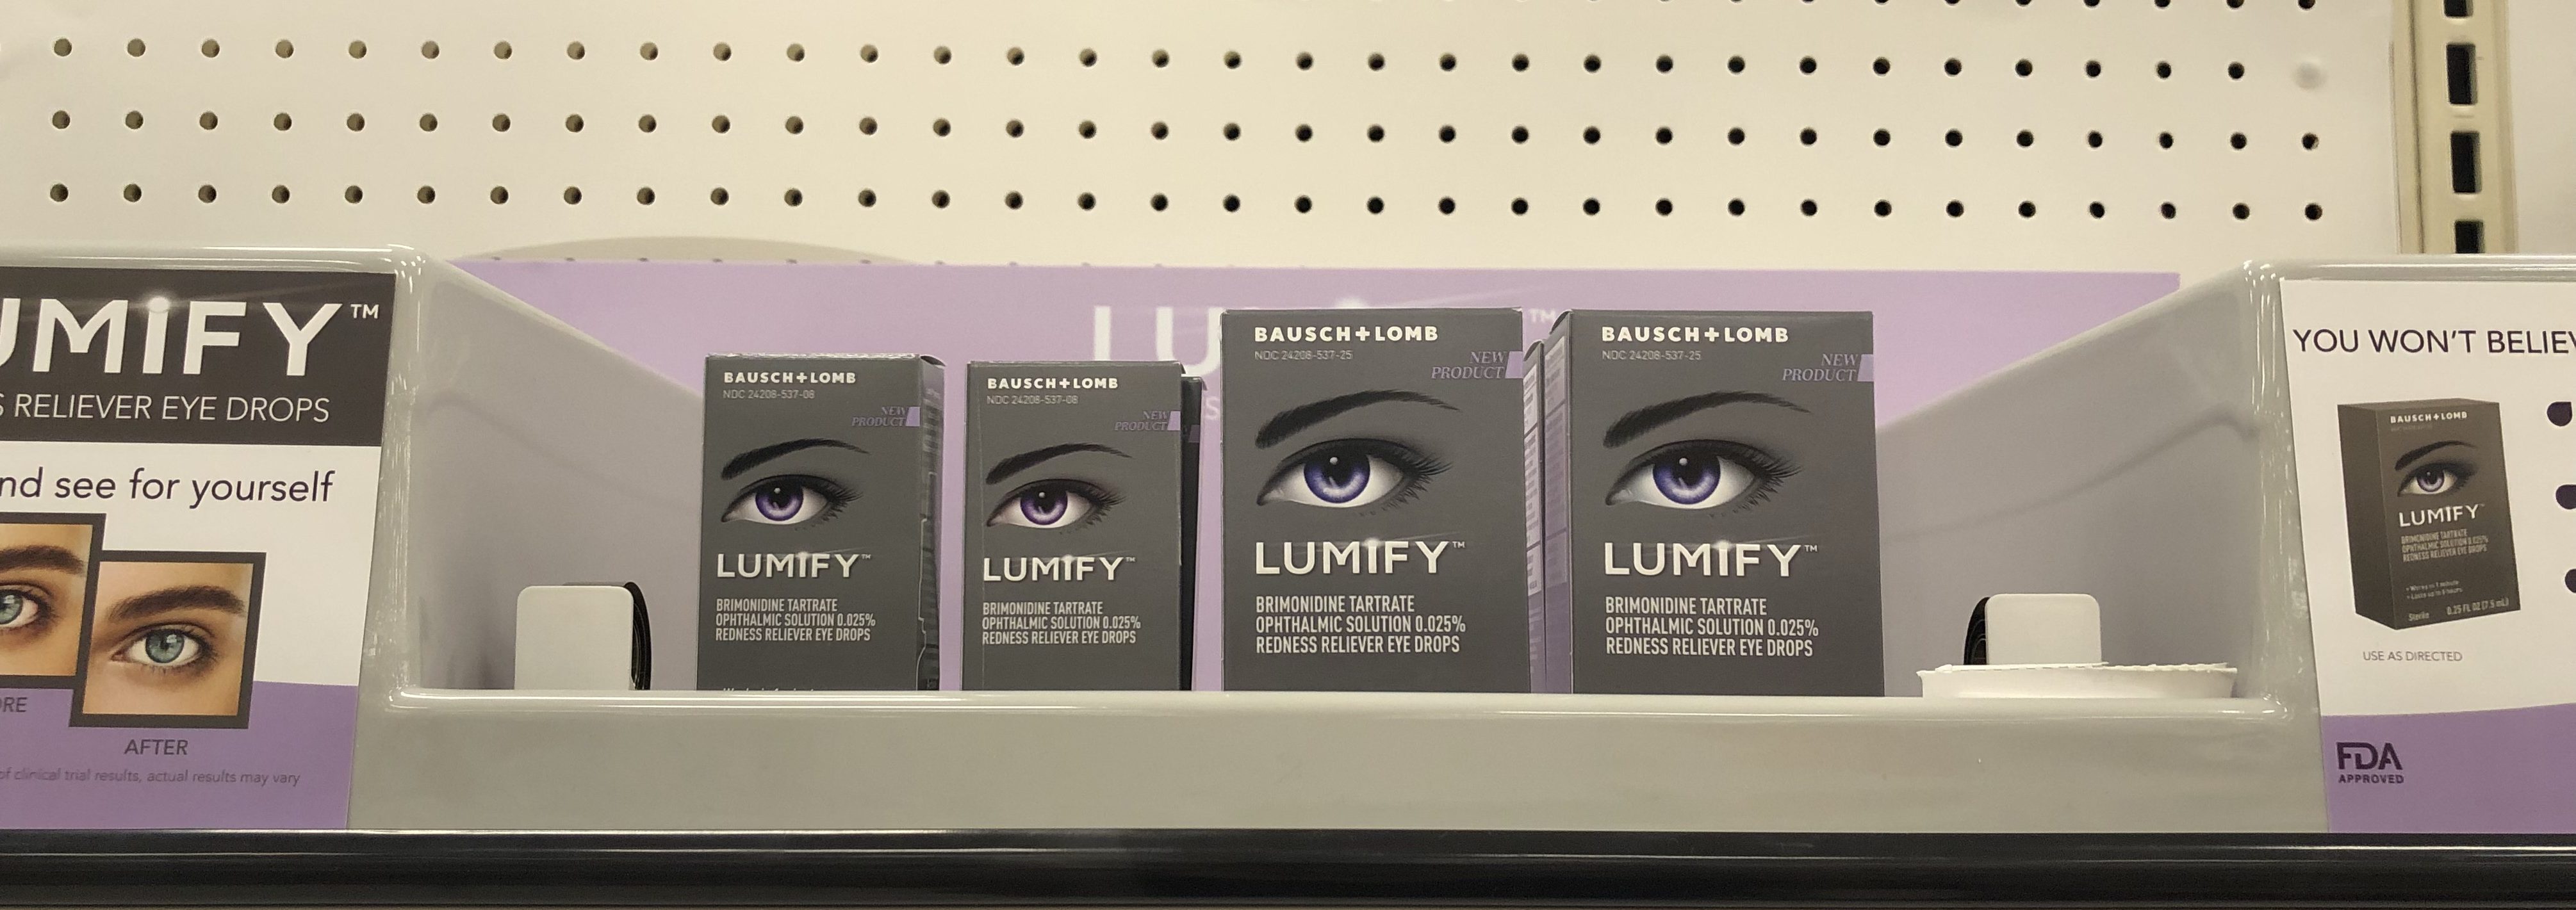 $6 Worth of New LUMIFY Eye Drops Coupons